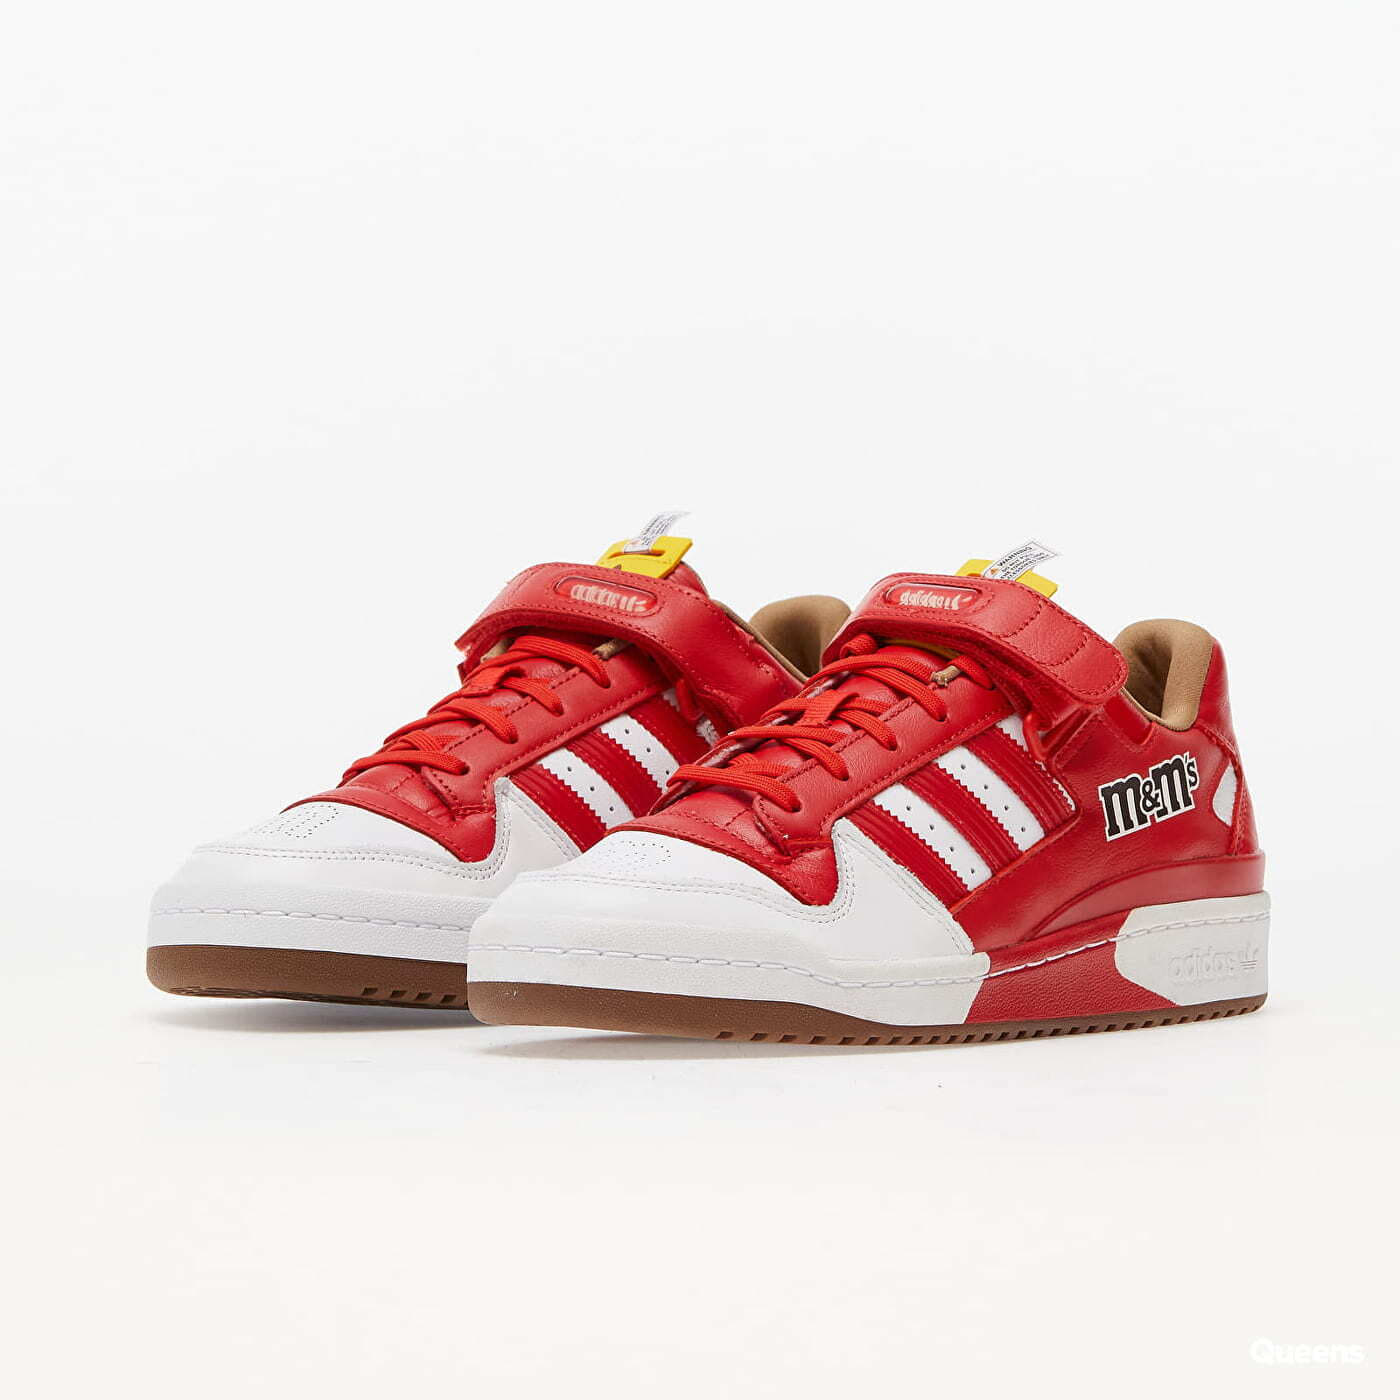 Men's sneakers and shoes adidas Originals M&M's Forum Low 84 red